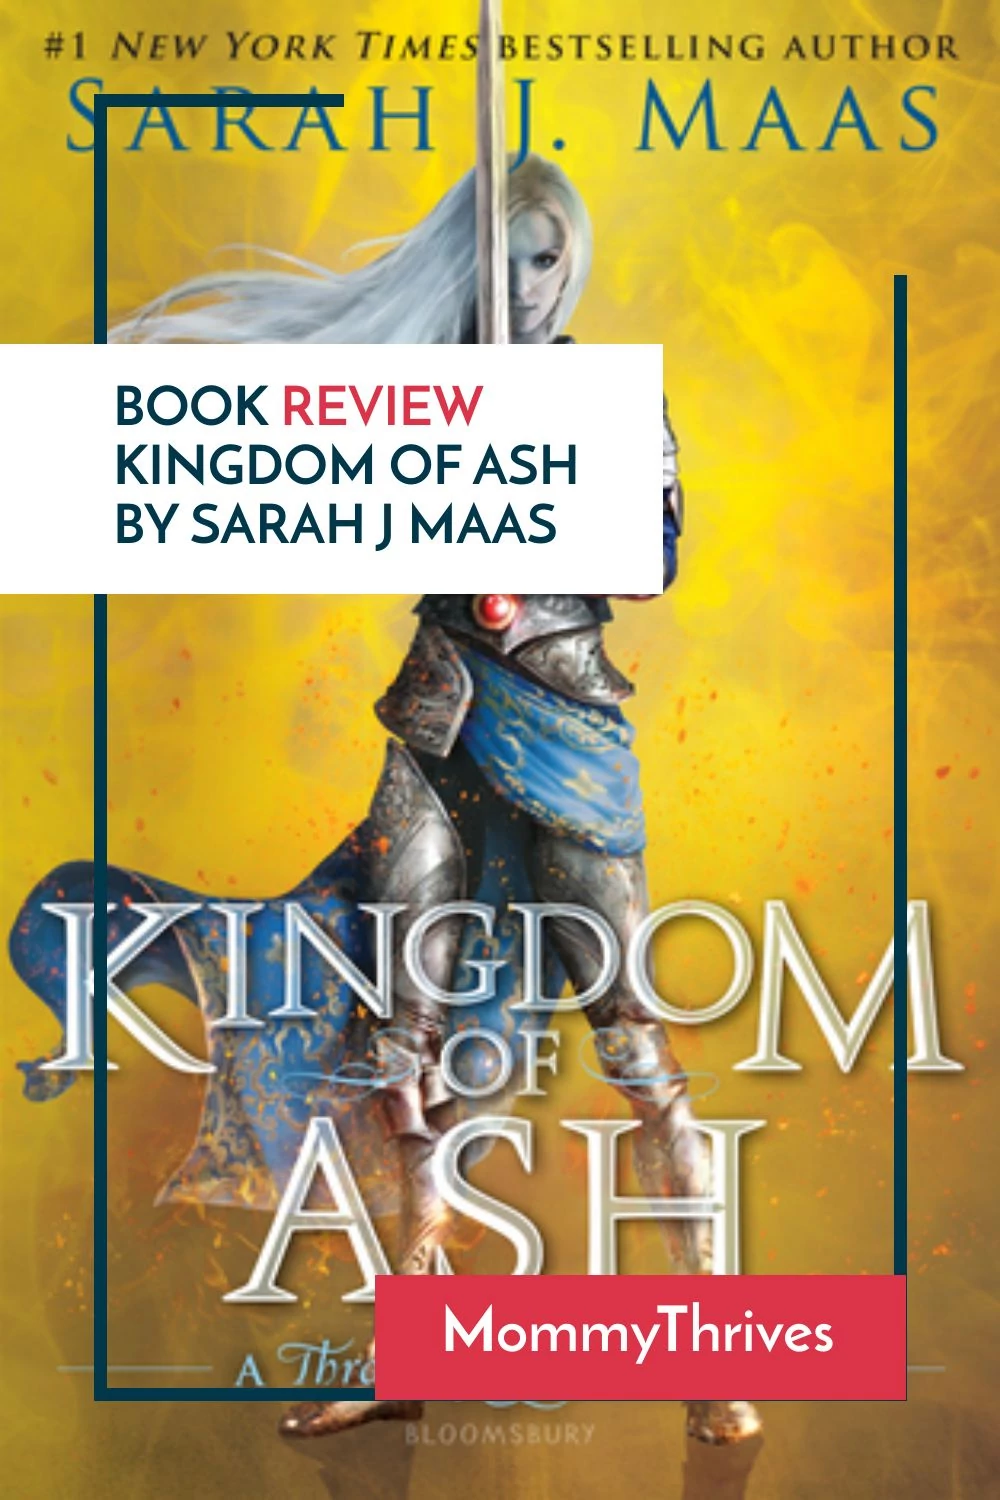 Young Adult Fantasy Book Review - Book Review Kingdom of Ash by Sarah J Maas - Kingdom of Ash Book Review